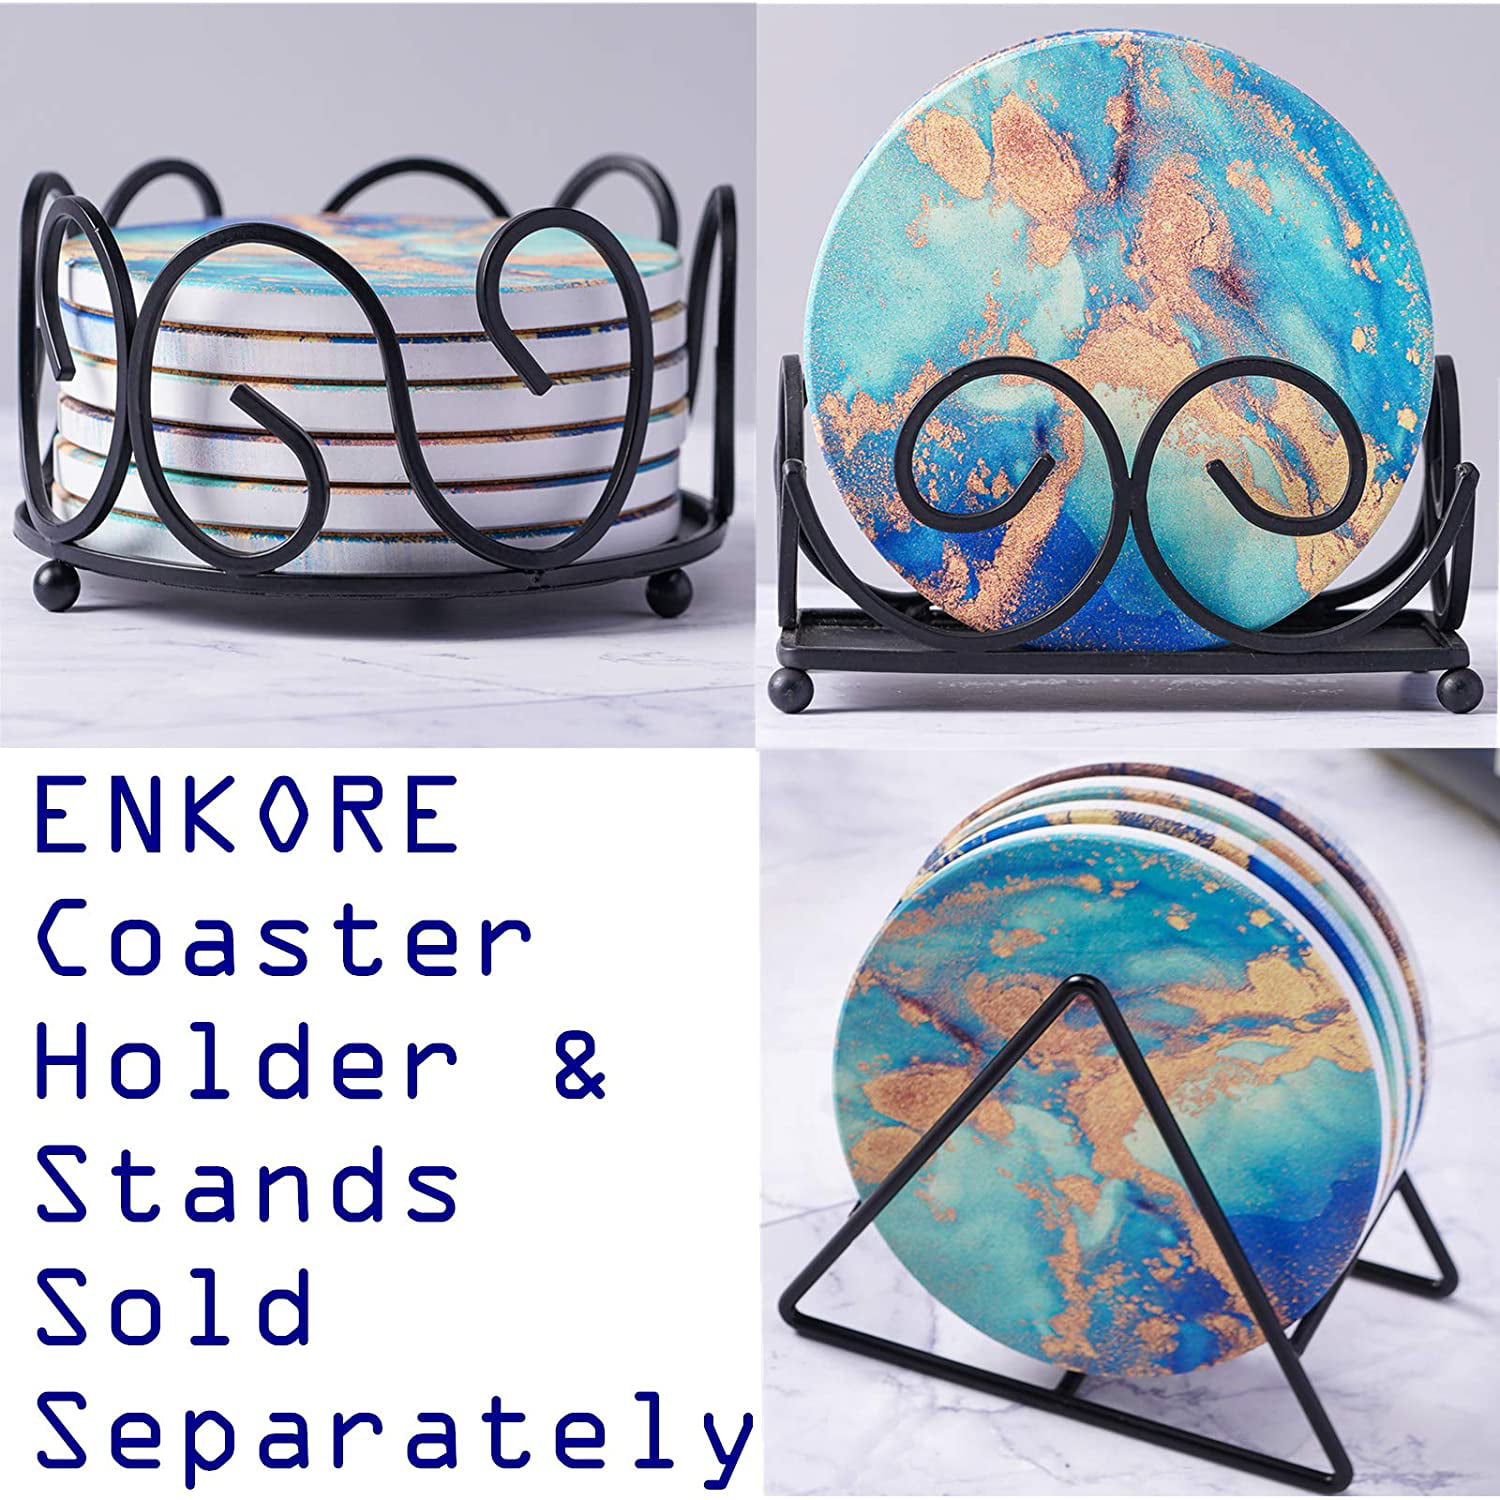 ENKORE Stone Coasters 4 Pack with Casings Save Furniture From Stains & Scratch 